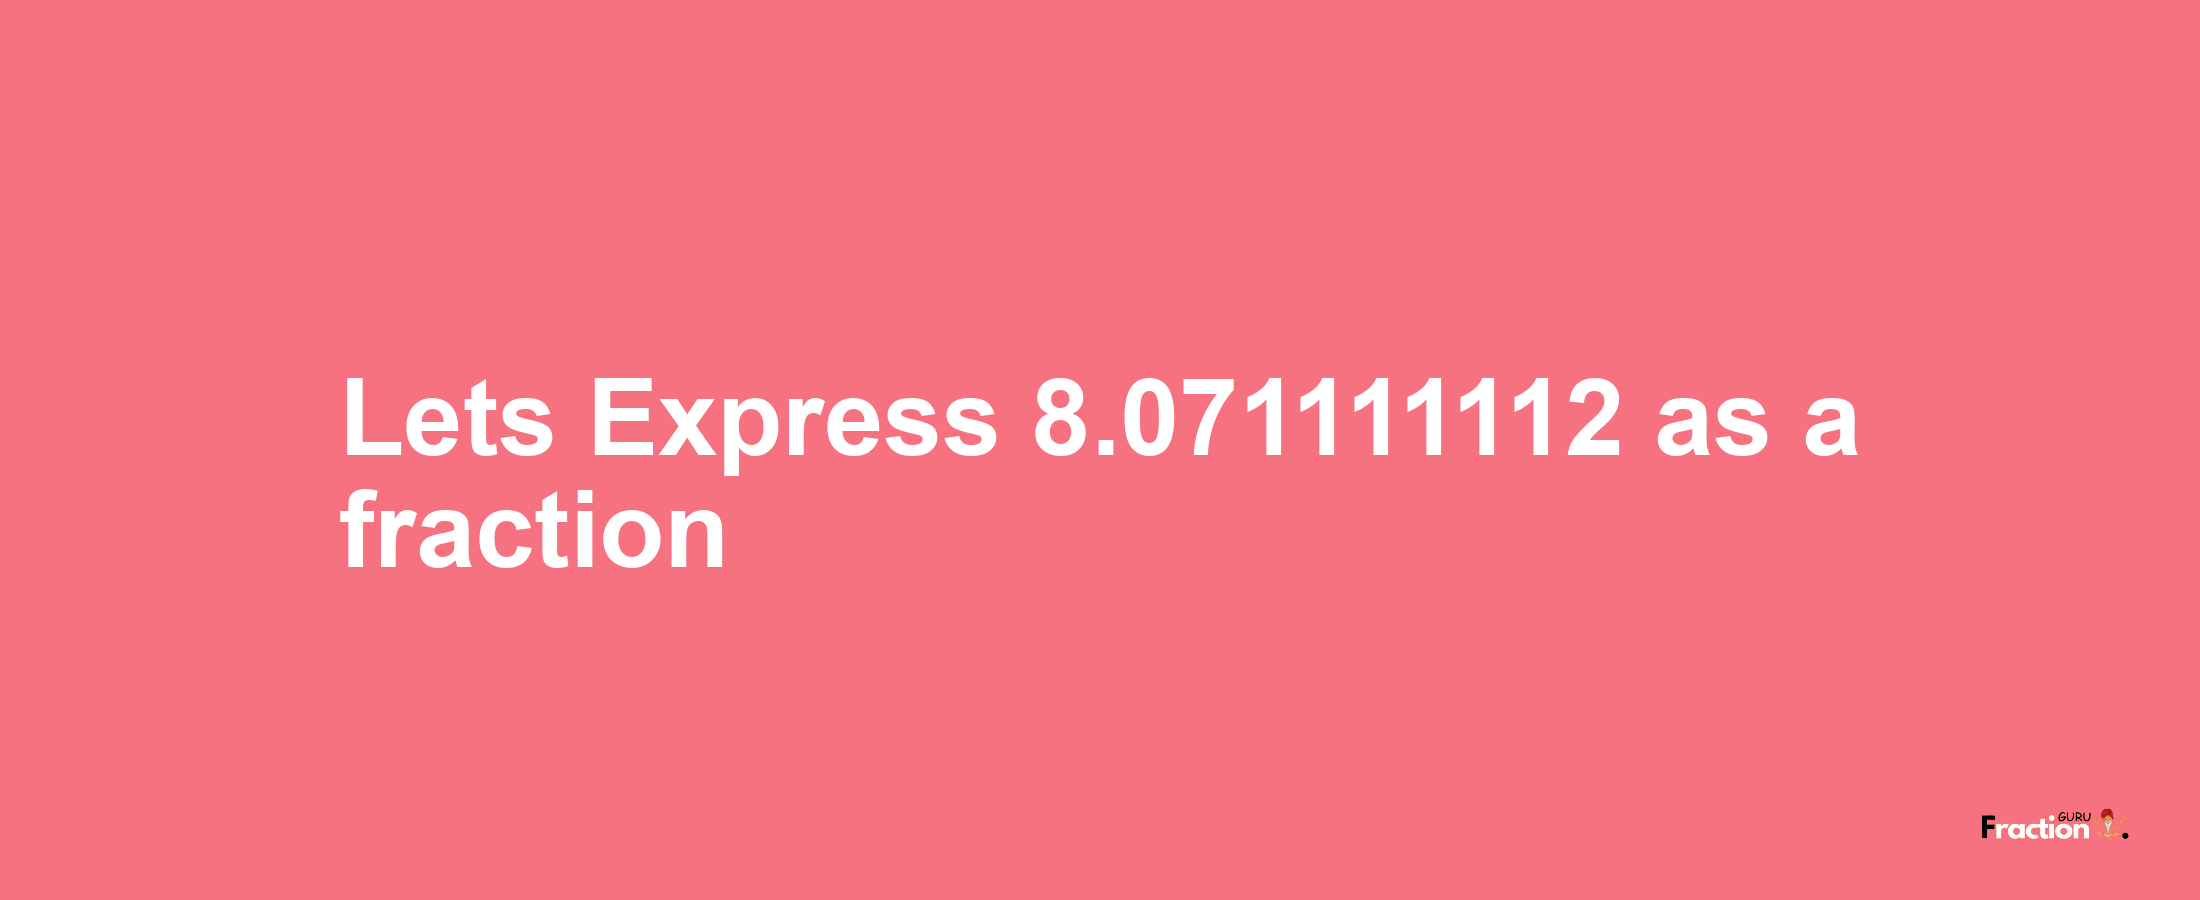 Lets Express 8.071111112 as afraction